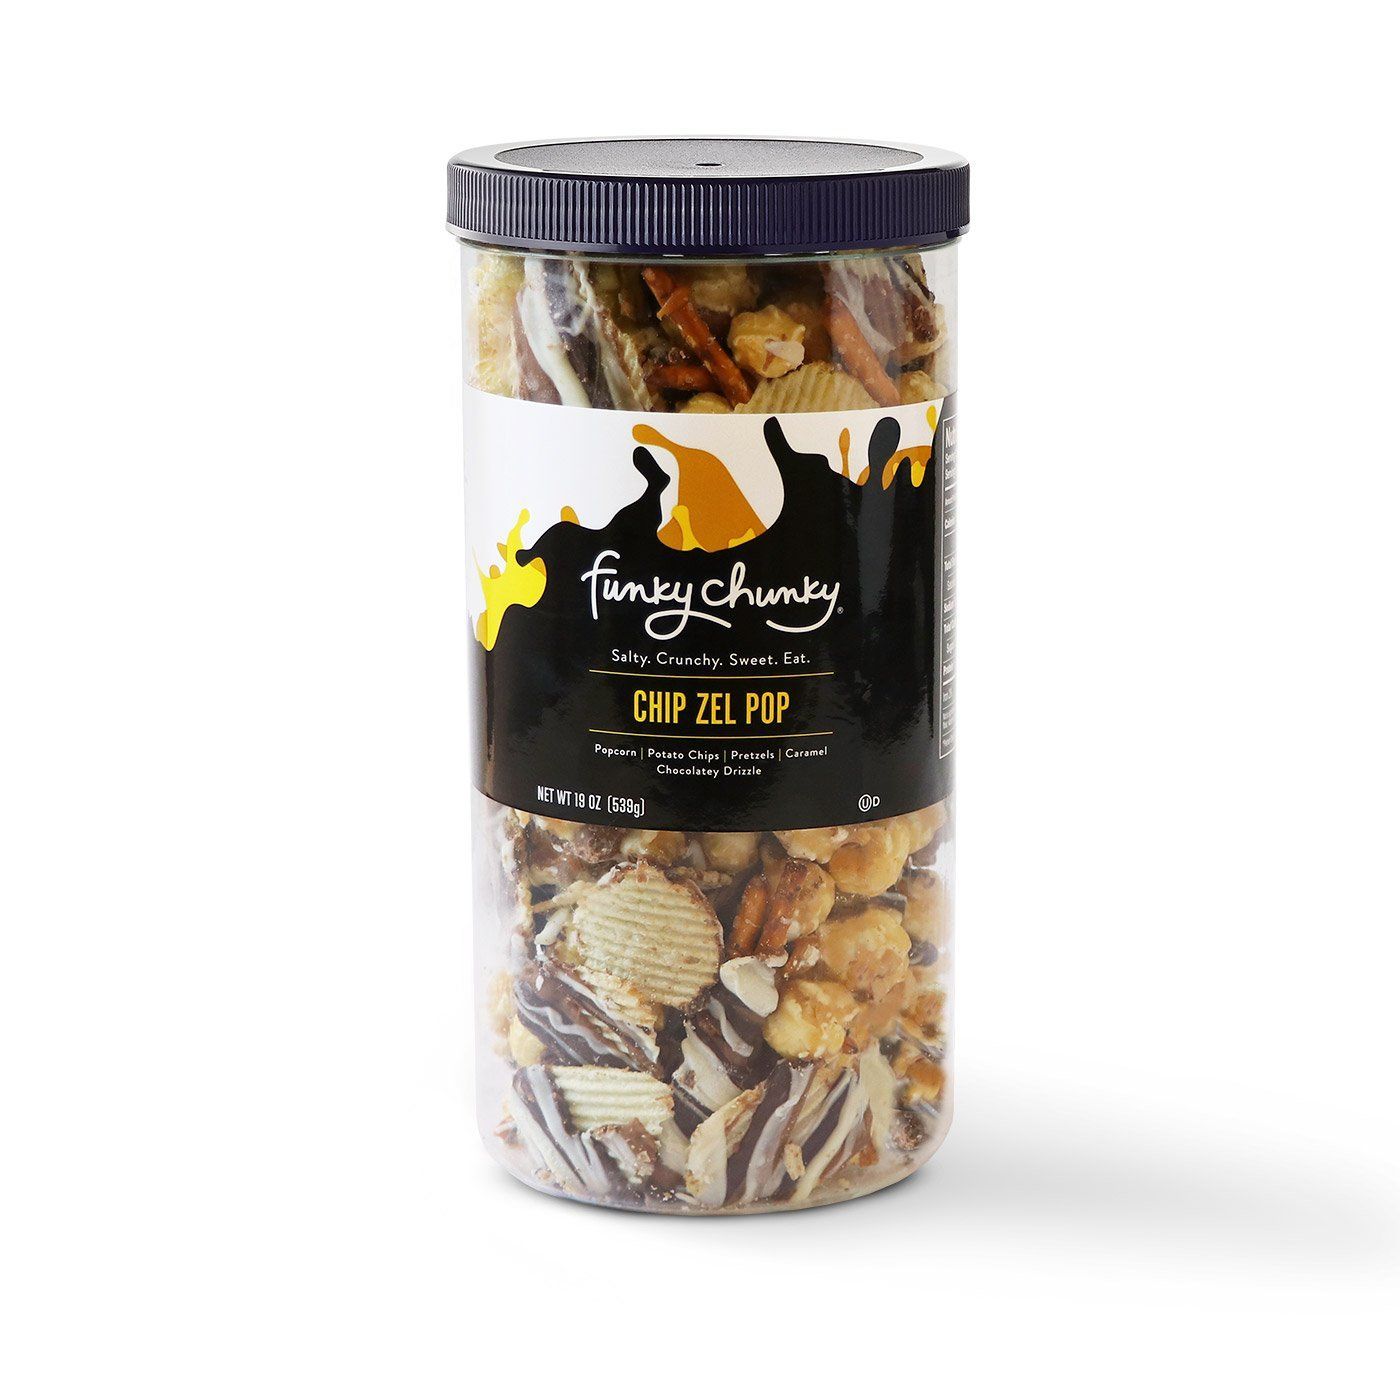 Chip Zel Pop Canister (19oz)-td {border: 1px solid #ccc;}br {mso-data-placement:same-cell;} All your cravings satisfied in one bite! Sweet and salty, chewy, crispy and crunchy, Chip Zel Pop gourmet popcorn is an incredible marriage of flavors that will keep you wanting more. Made with crisp potato chips, pretzel sticks, and buttery caramel popcorn - mixed together and drizzled with thick caramel and dark, milk and white chocolatey goodness. Contains 1 19 oz canister-Funky Chunky